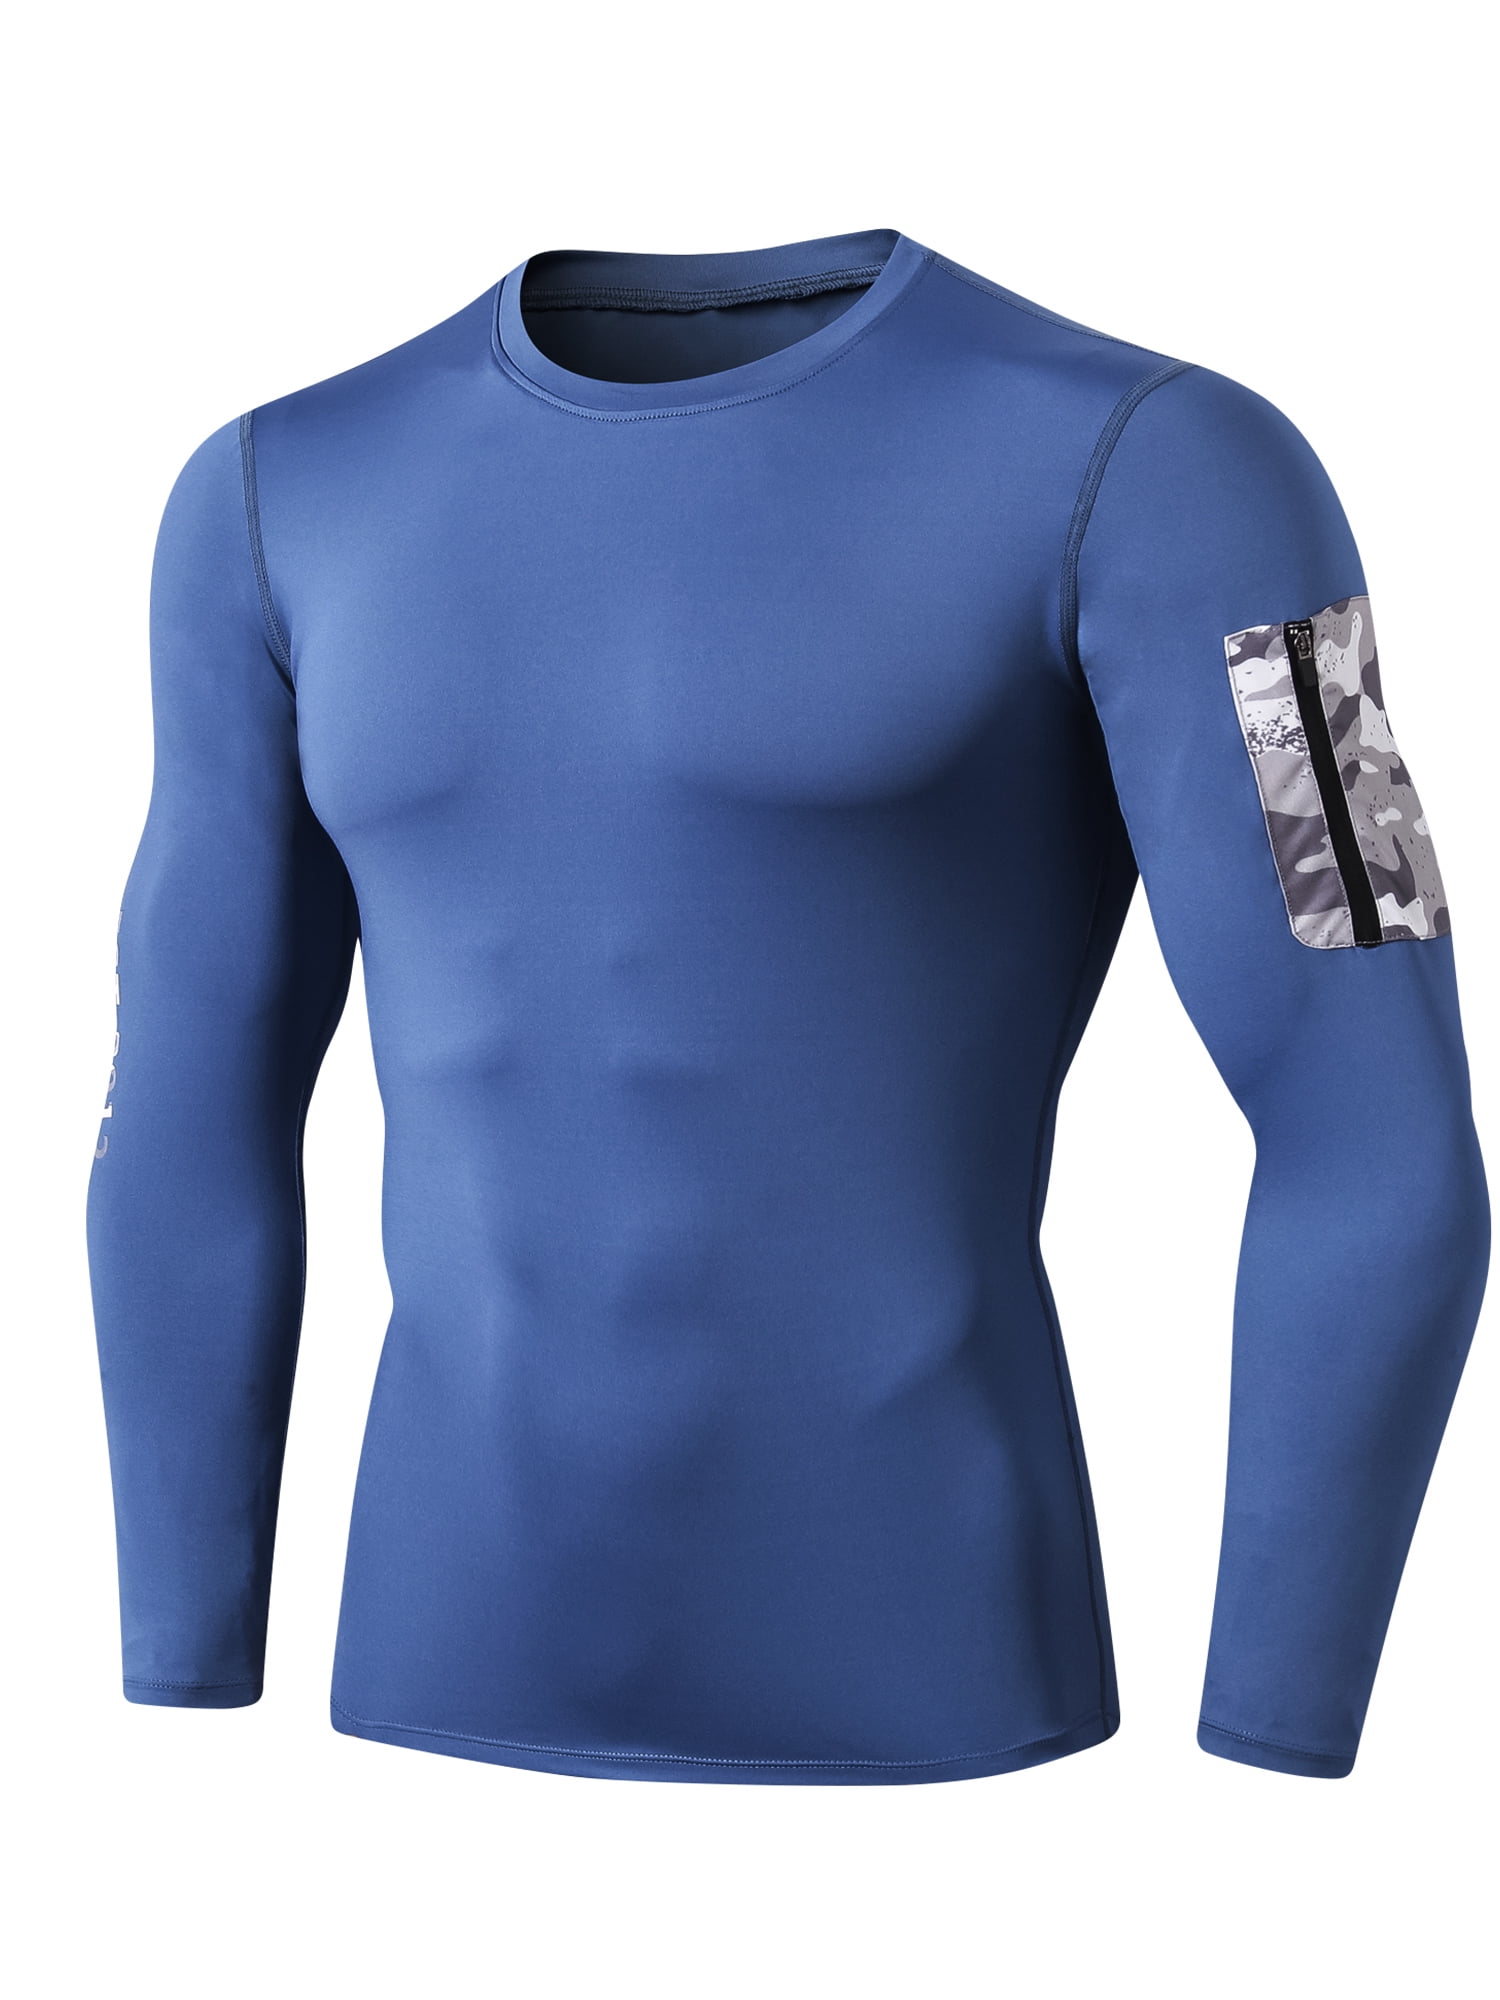 Mens Compression Skin Base Layers Running Athletic Gym T-shirts Dri fit Slim fit 